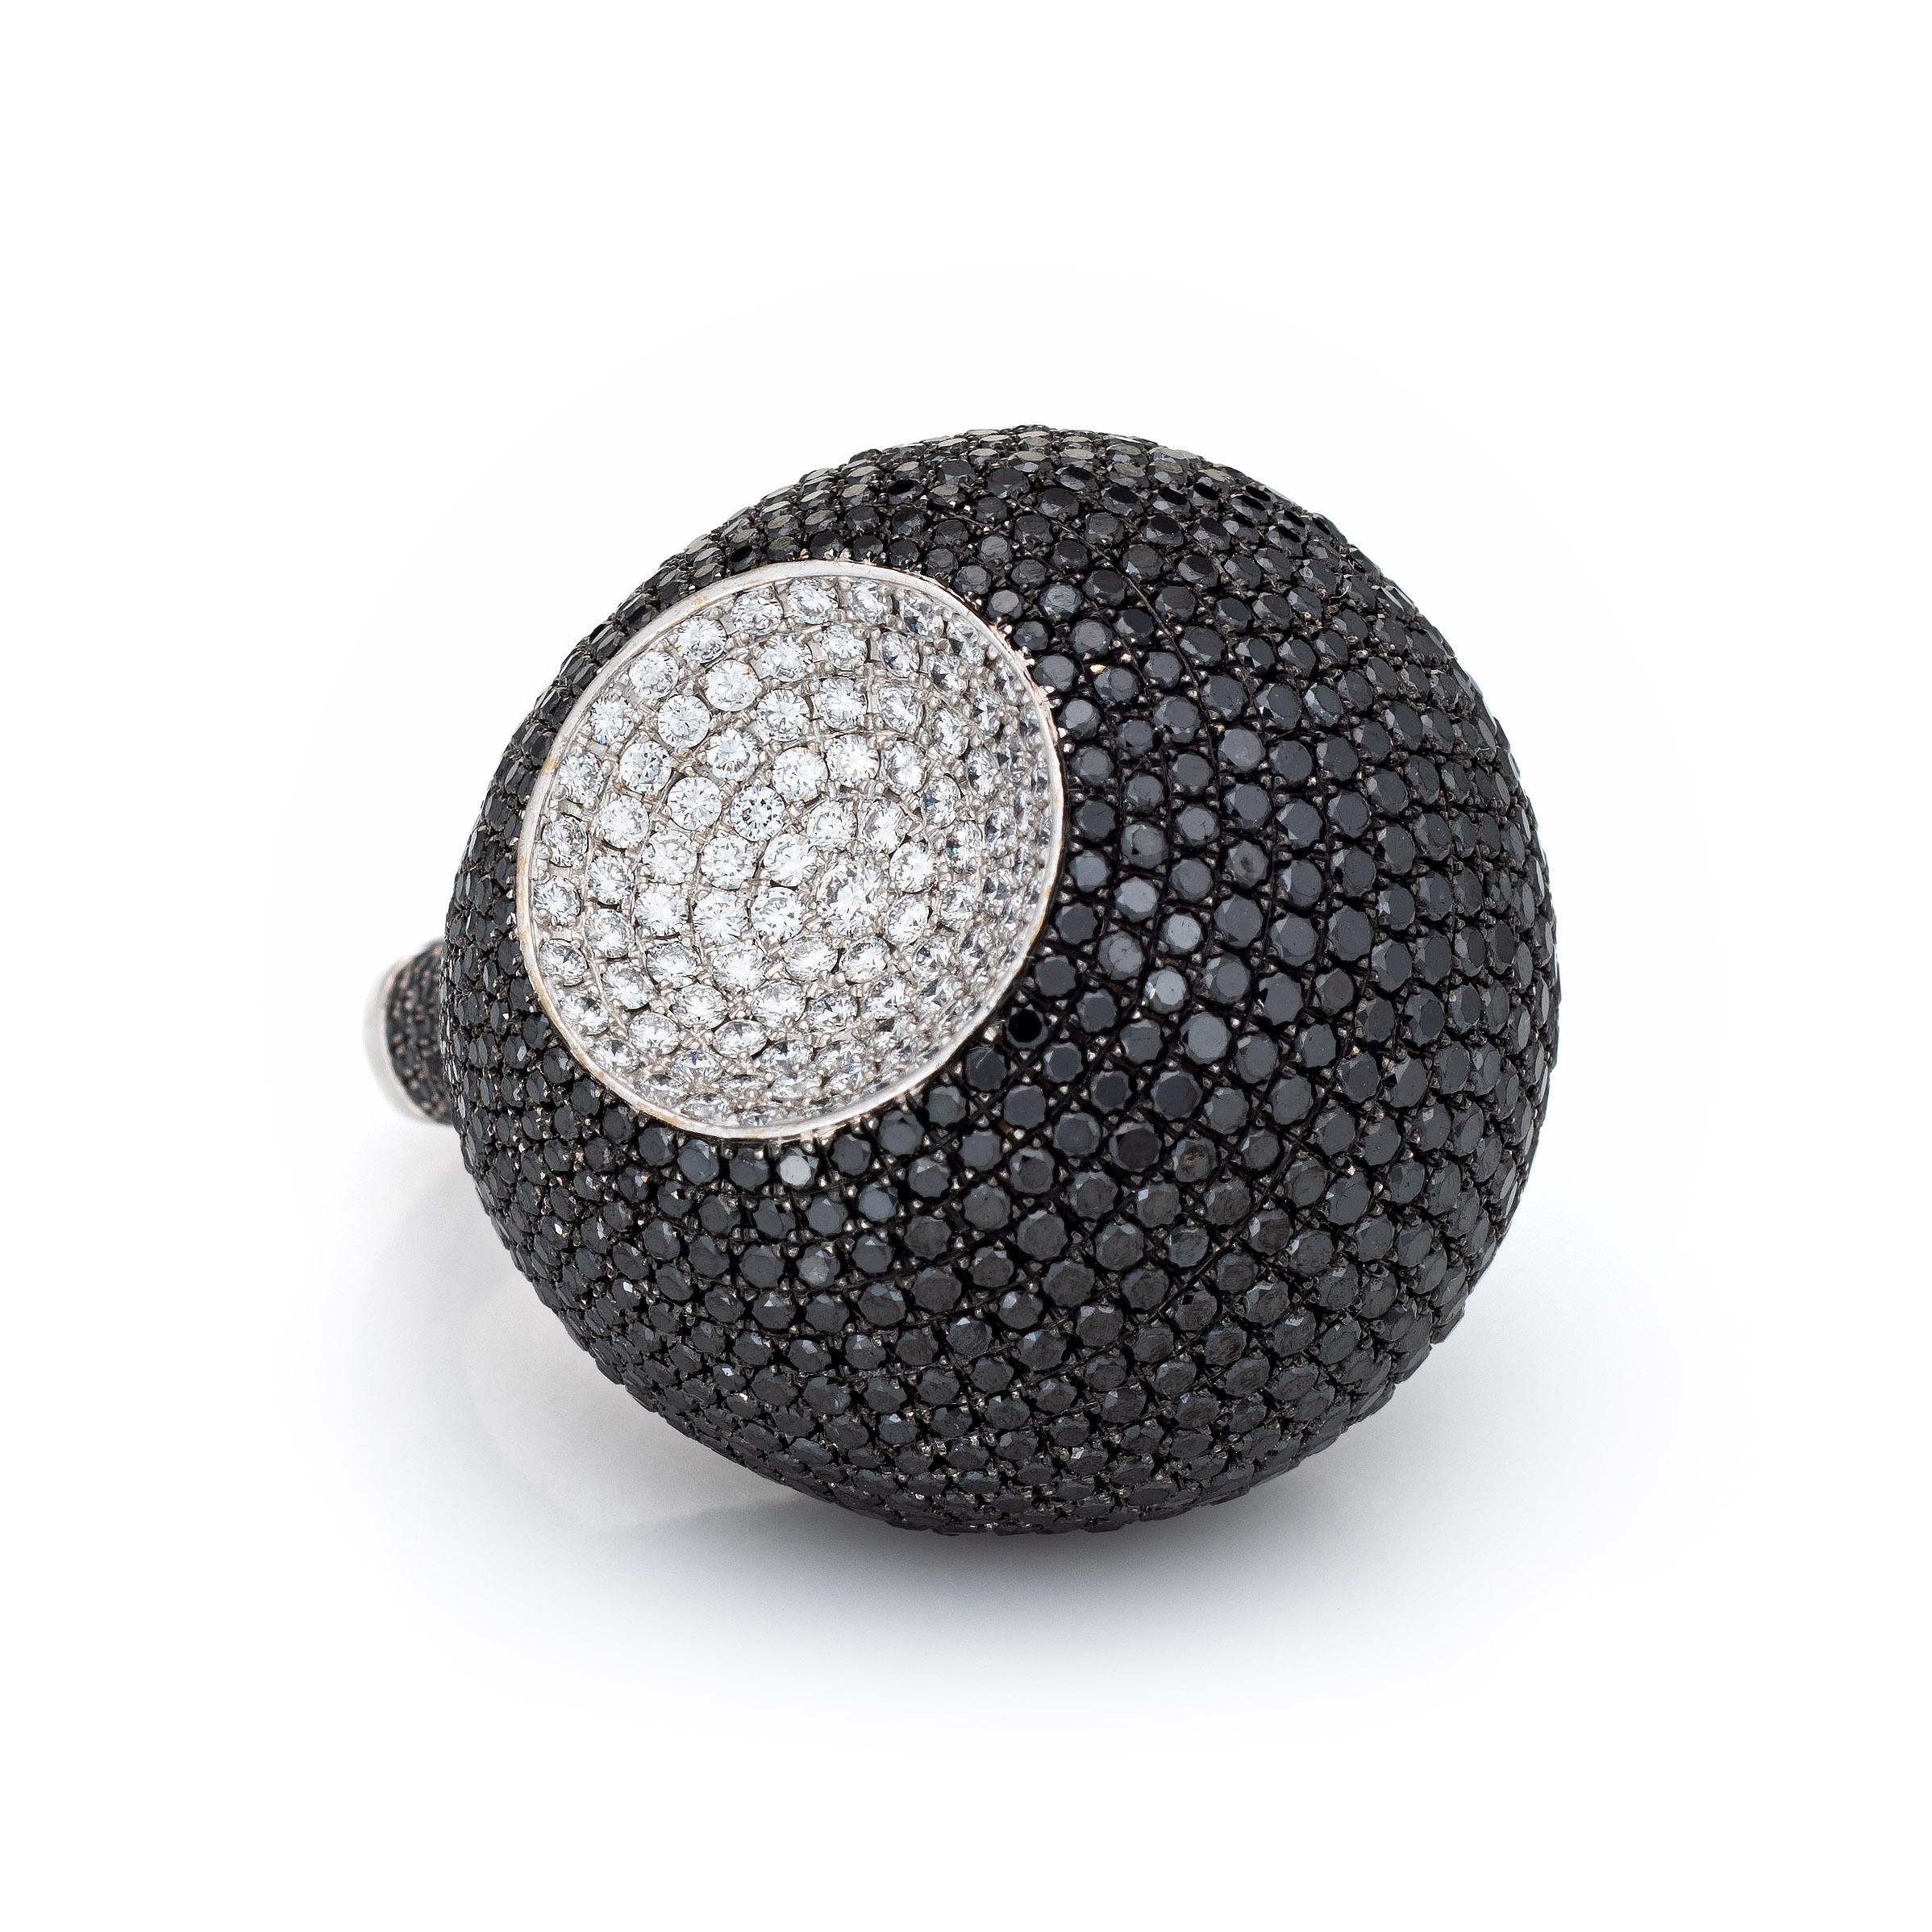 Distinct and bold black diamond 'moon crater' ring (circa 2000s) crafted in 18 karat white gold. 

Black diamond total an estimated 5 carats. White diamonds total an estimated 1 carat (estimated at G-H color and VS2-SI1 clarity). 

The large